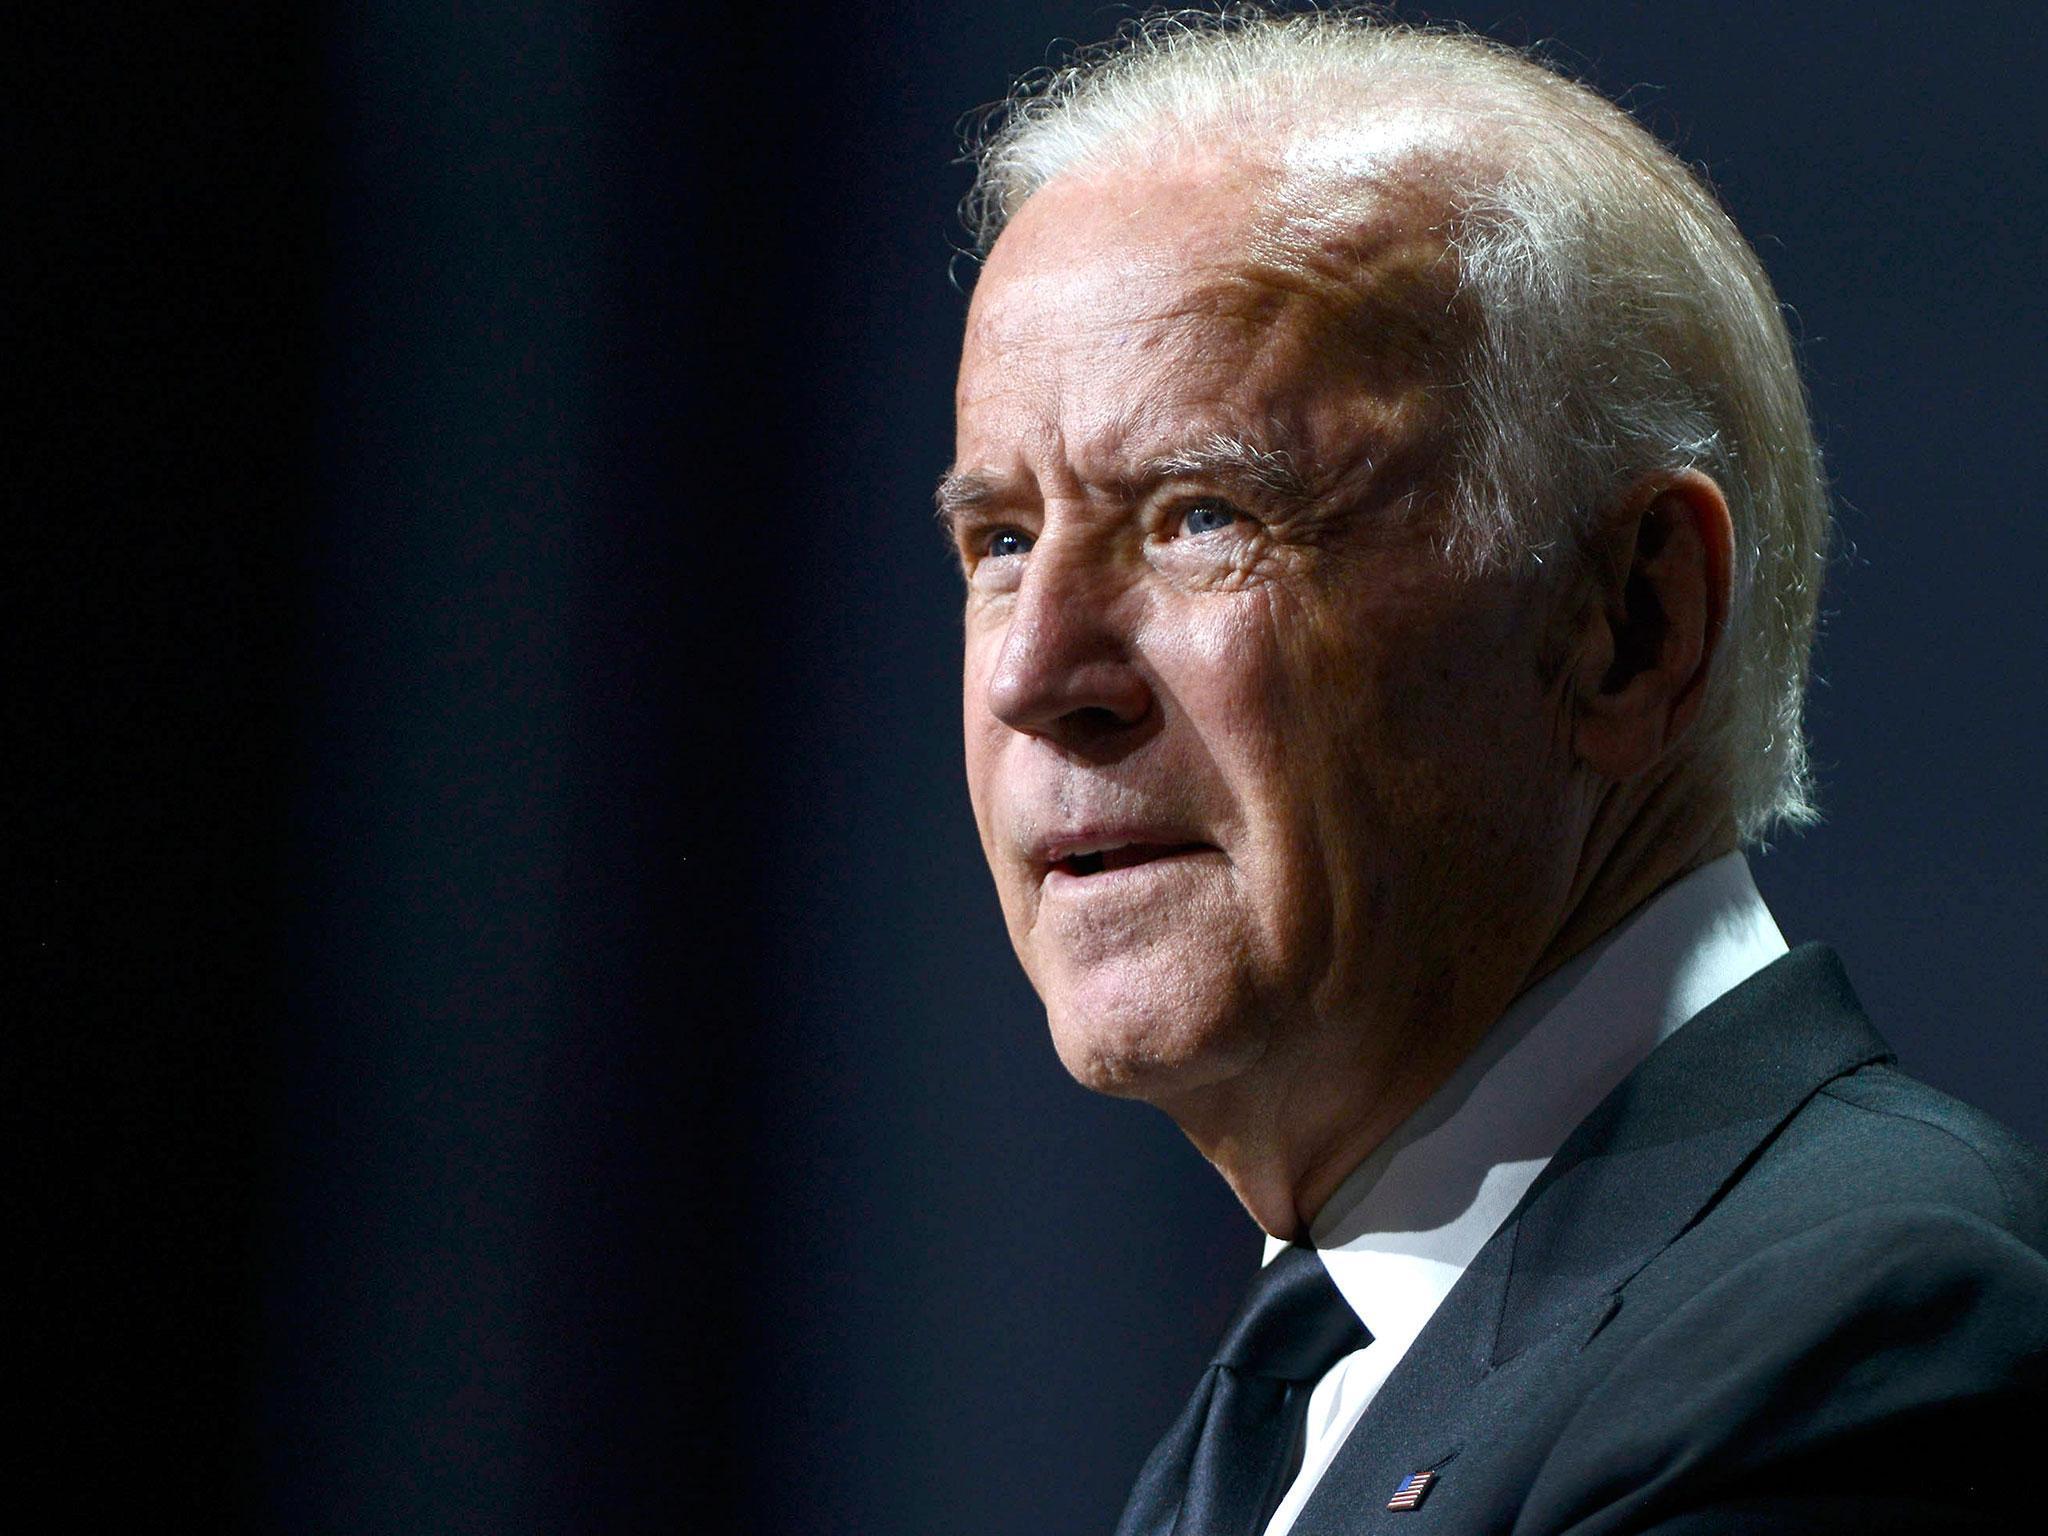 Joe Biden is currently on a promotional tour of his memoir